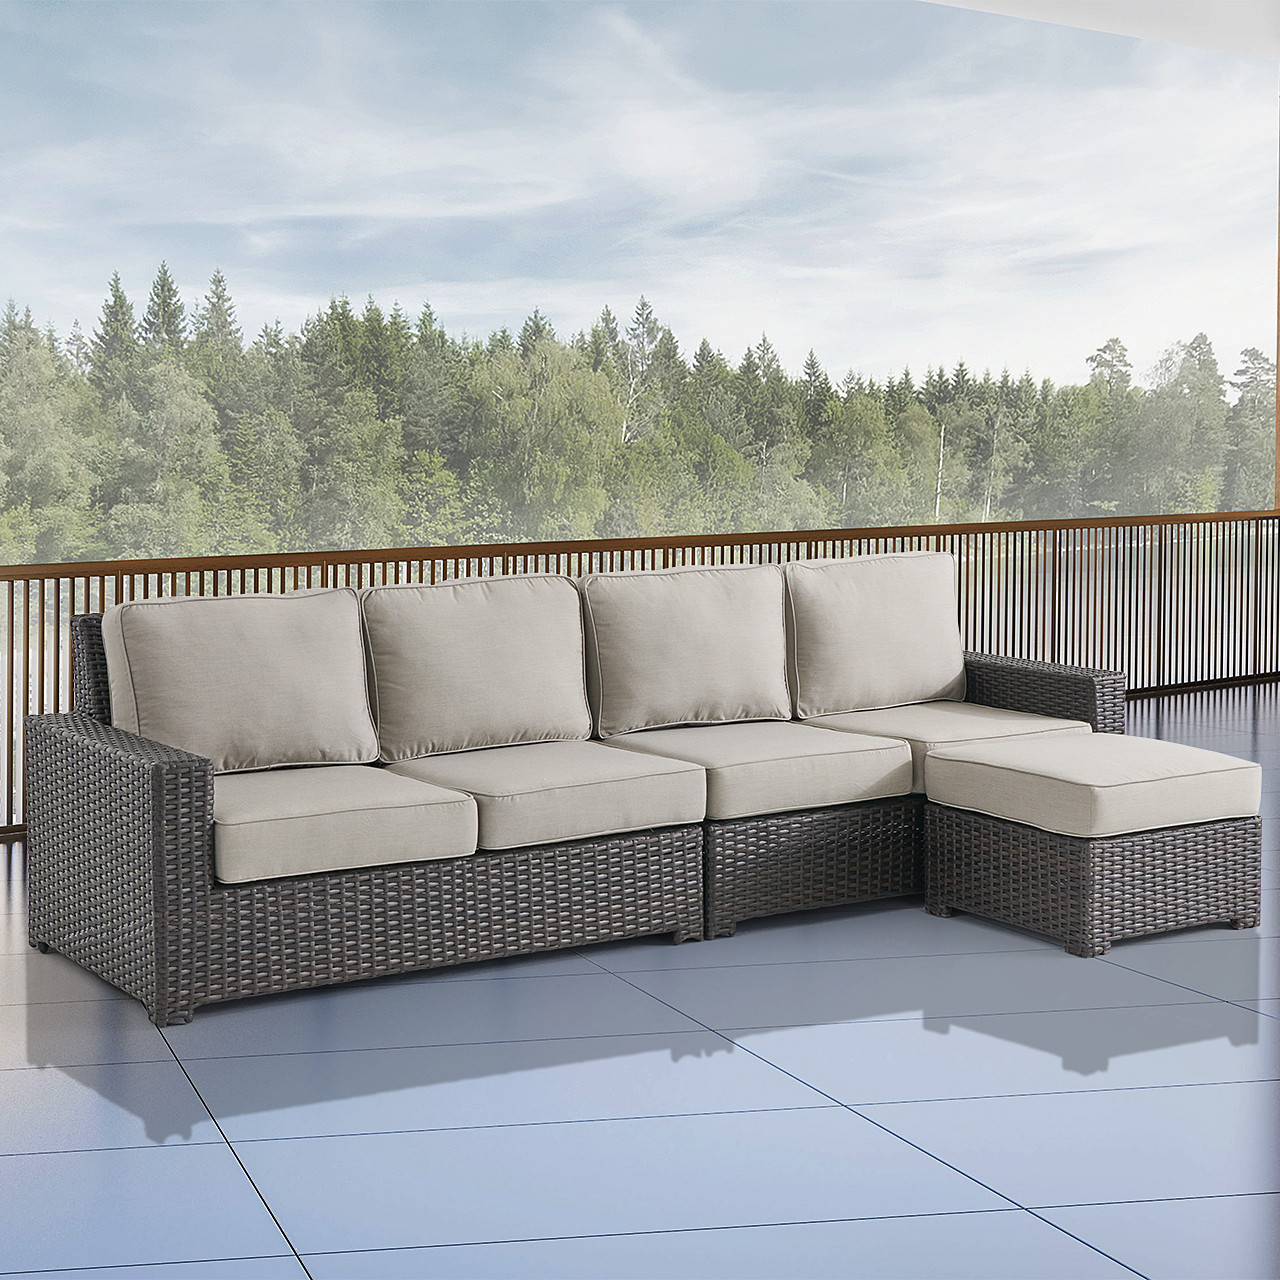 San Lucas Dark Elm Outdoor Wicker with Cushions 3 Piece Sectional Group + 22.75 in. Rect. Ottoman